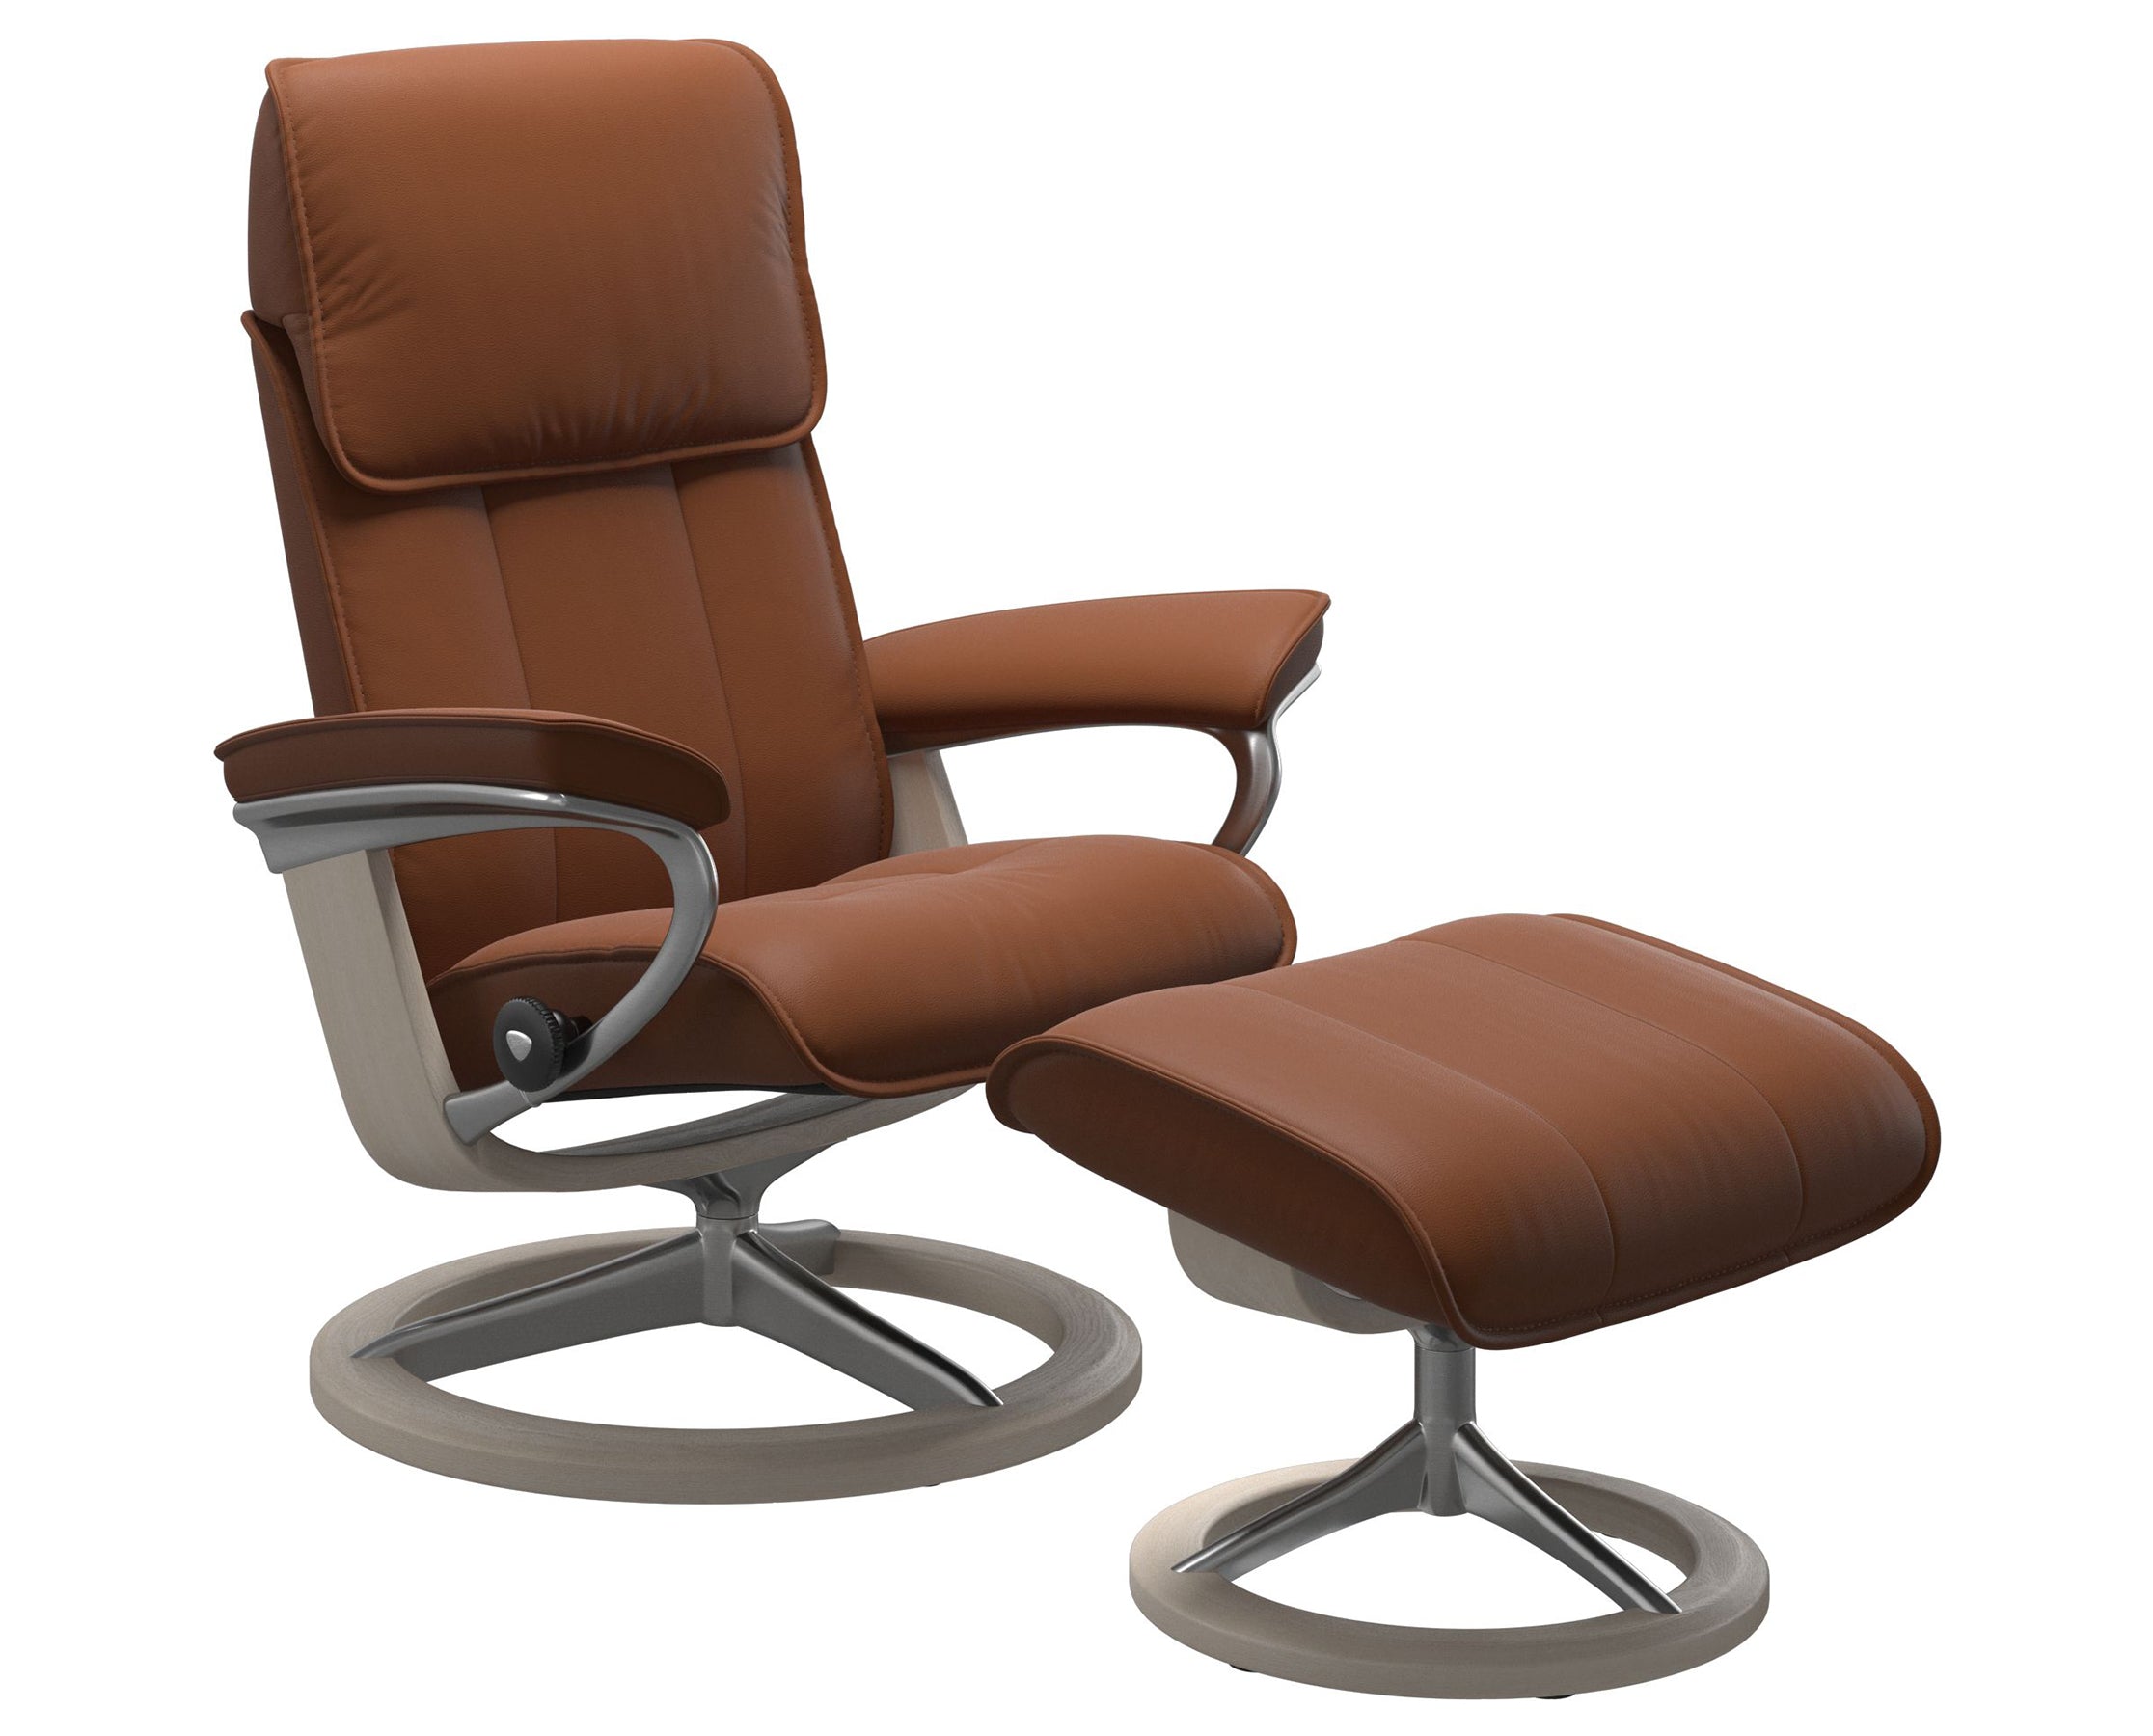 Paloma Leather New Cognac M/L and Whitewash Base | Stressless Admiral Signature Recliner | Valley Ridge Furniture